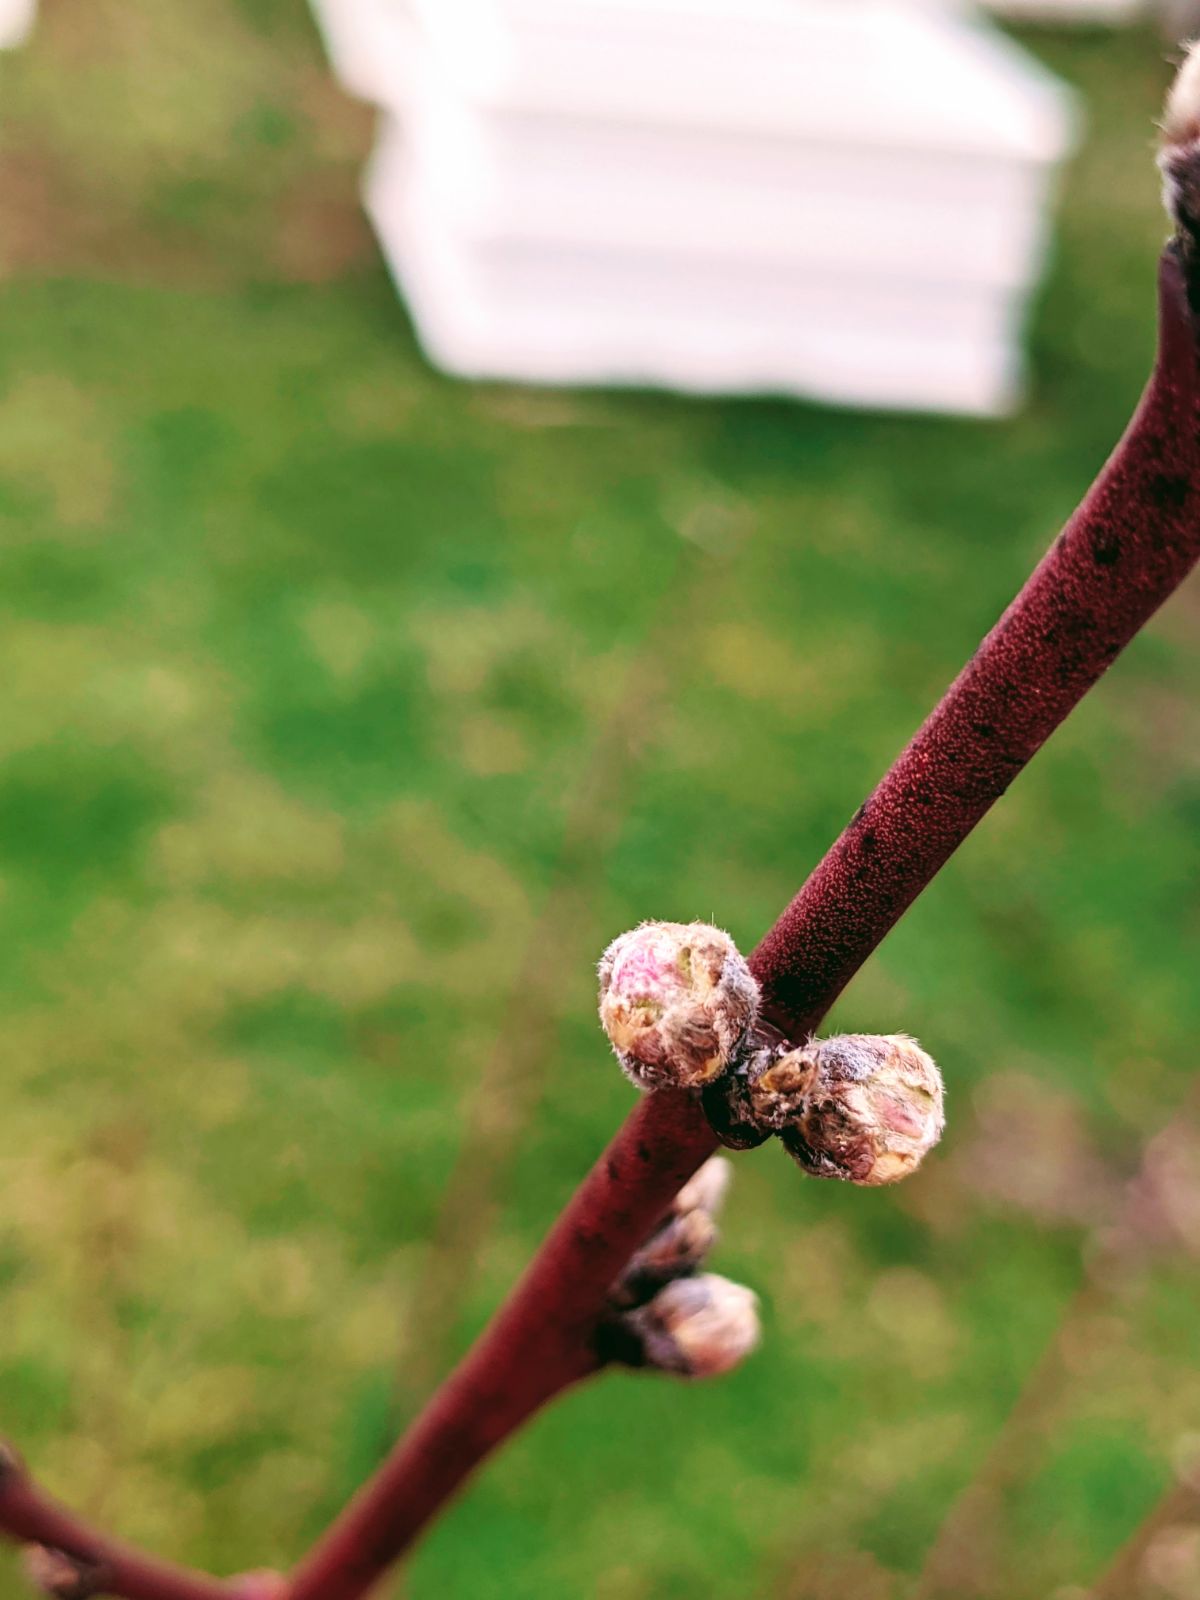 Our Red Haven peach tree buds getting ready to bloom